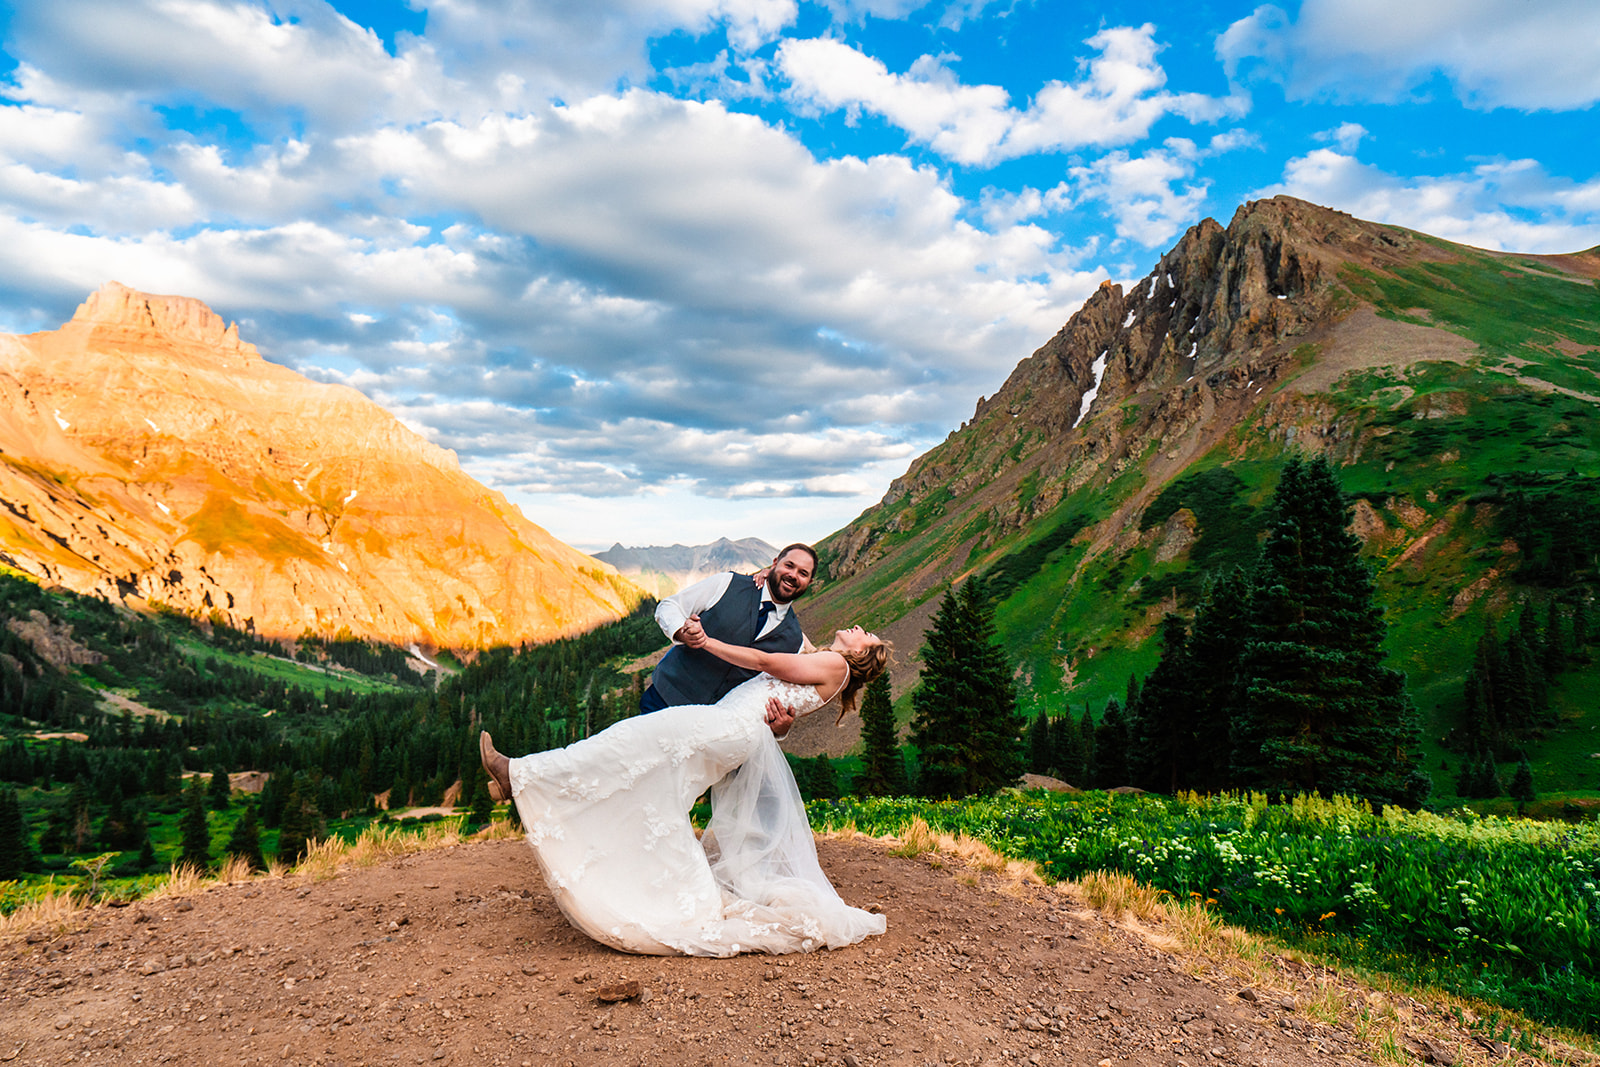 Groom dipping bride at Yankee Boy Basin for during elopement and wedding